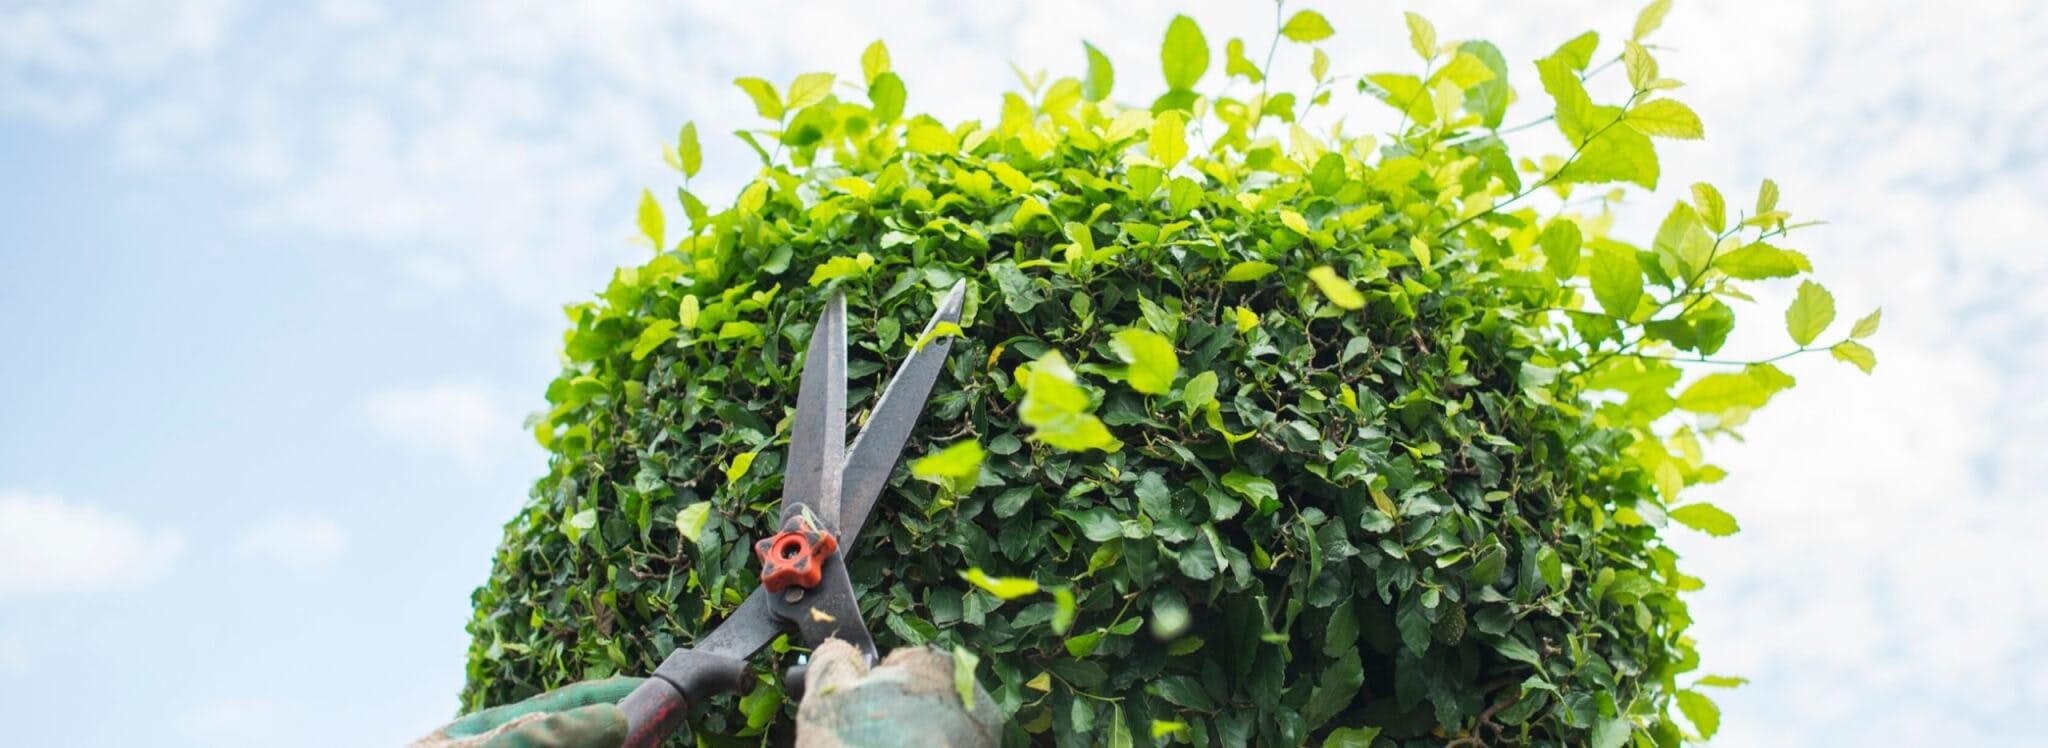 Hedge trimmers on plant